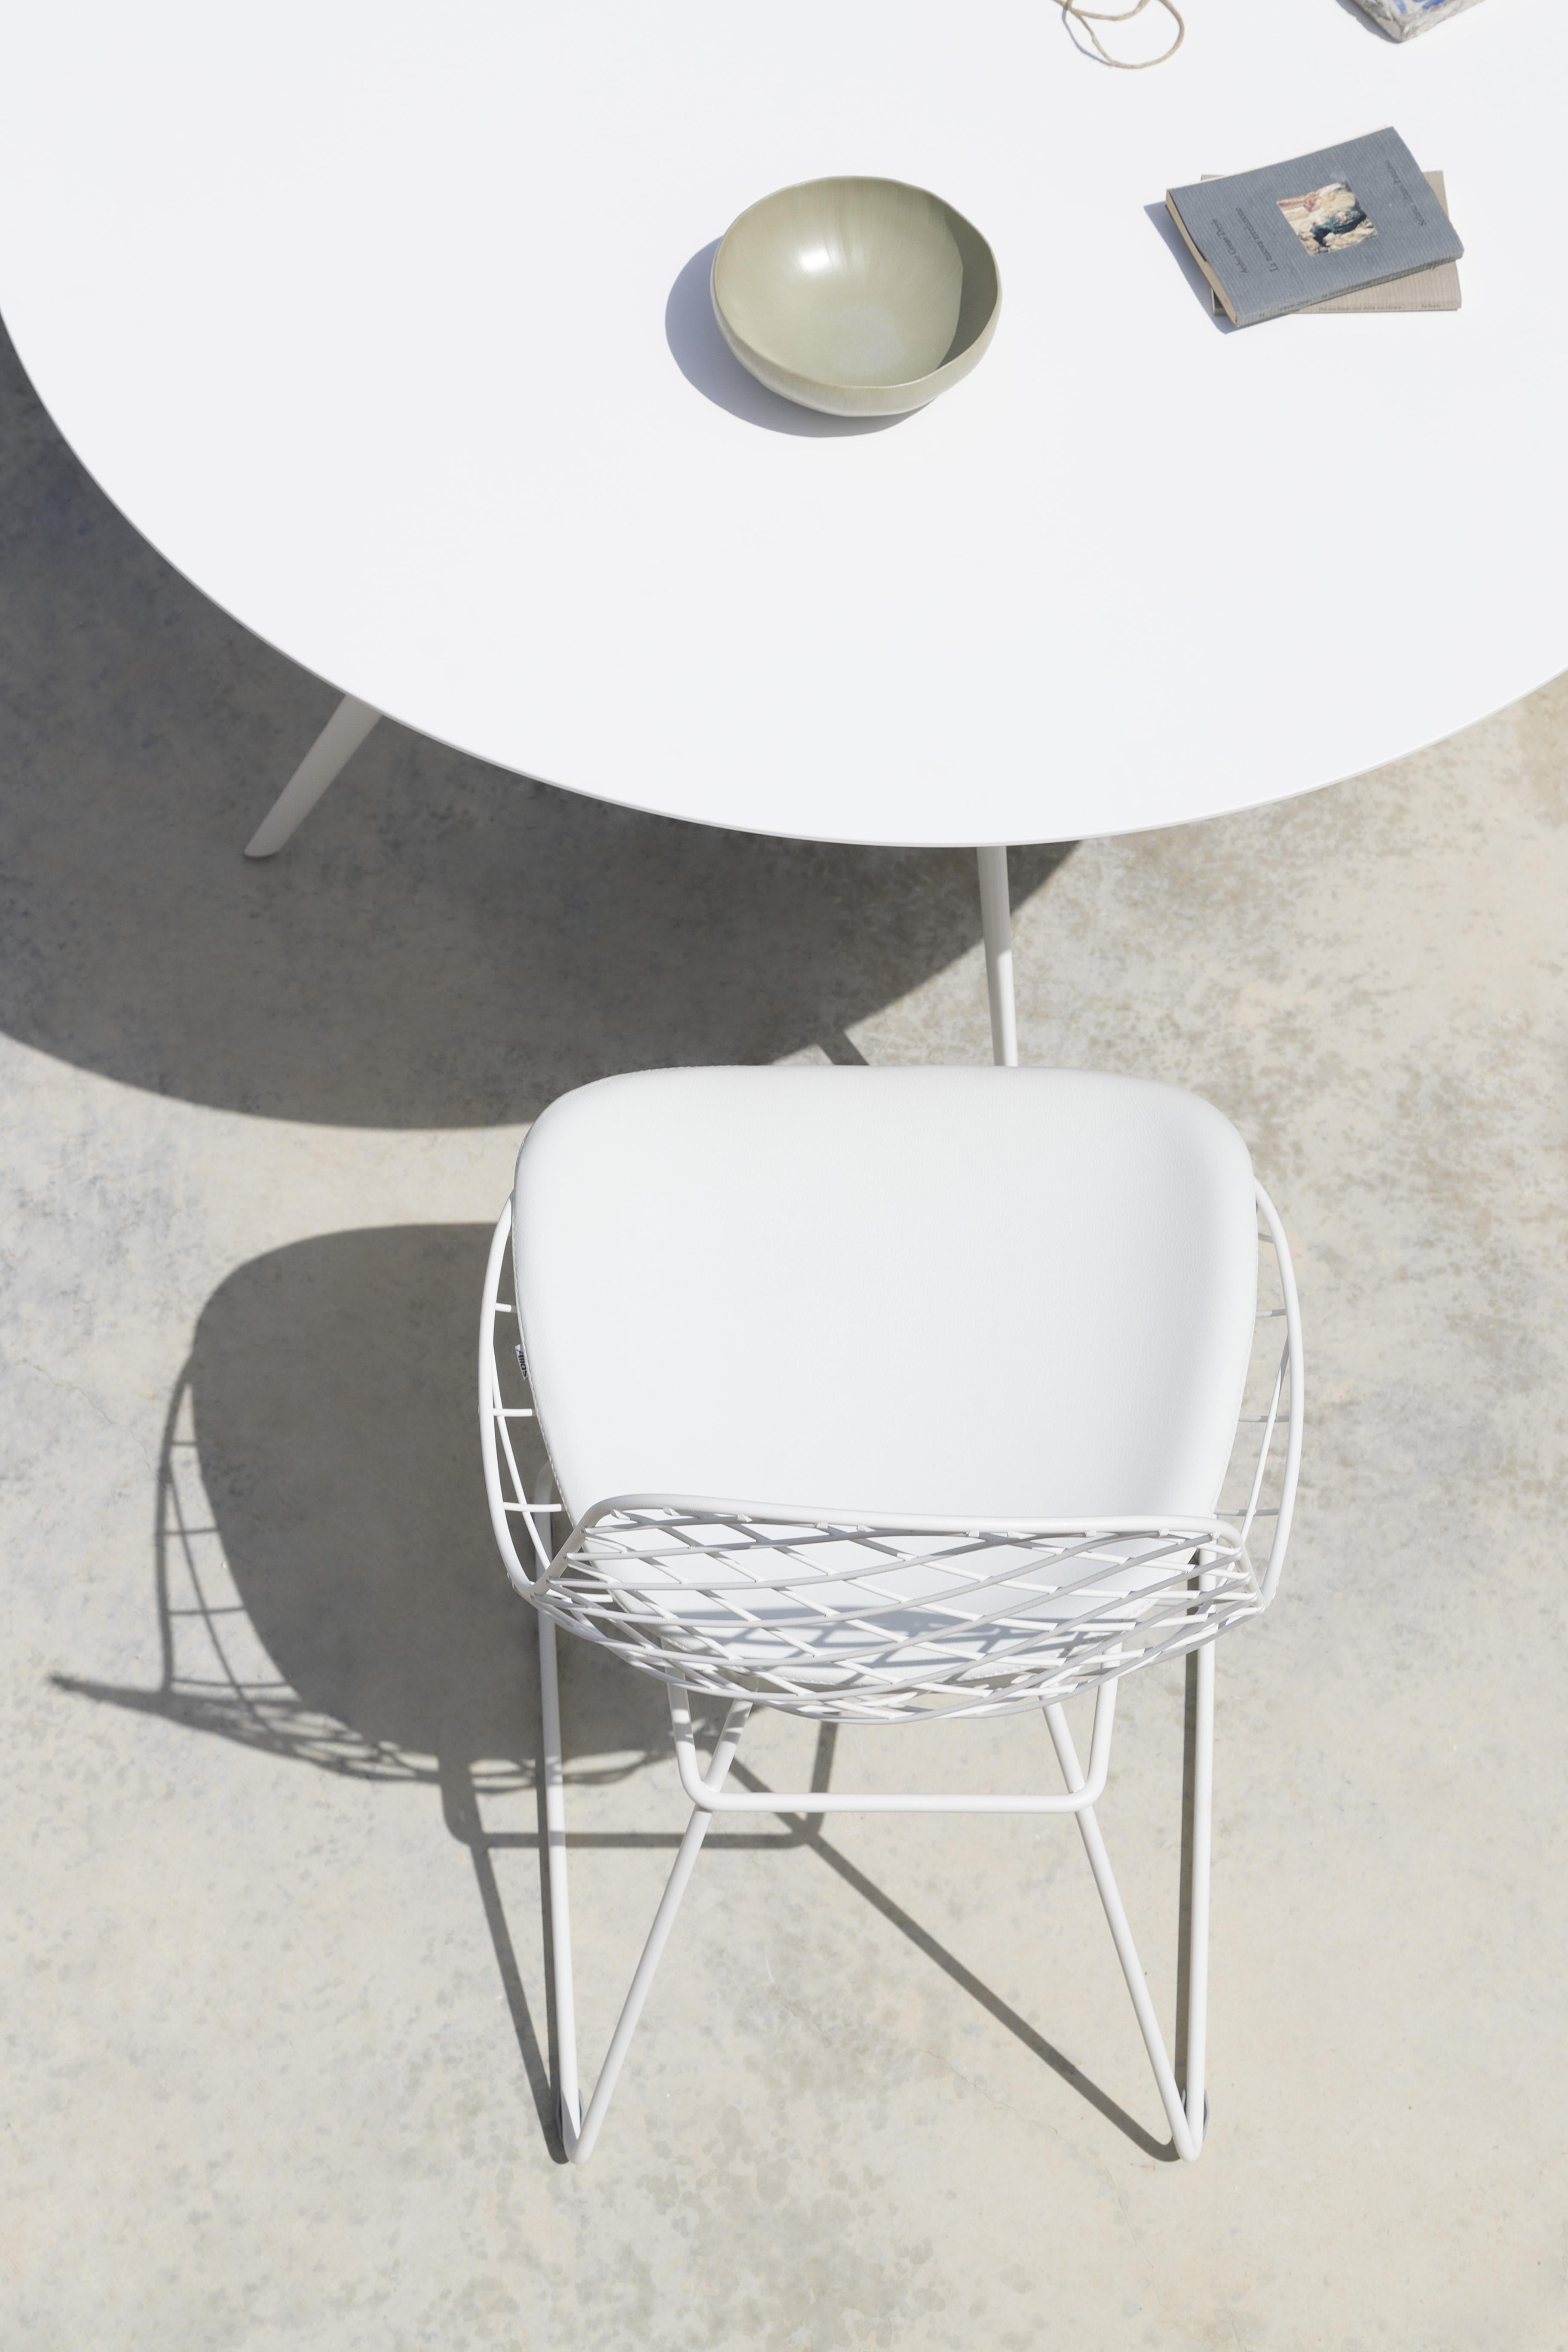 Contemporary Alias N01 Kobi Sledge Outdoor Chair in Leather Seat with White Lacquered Frame For Sale